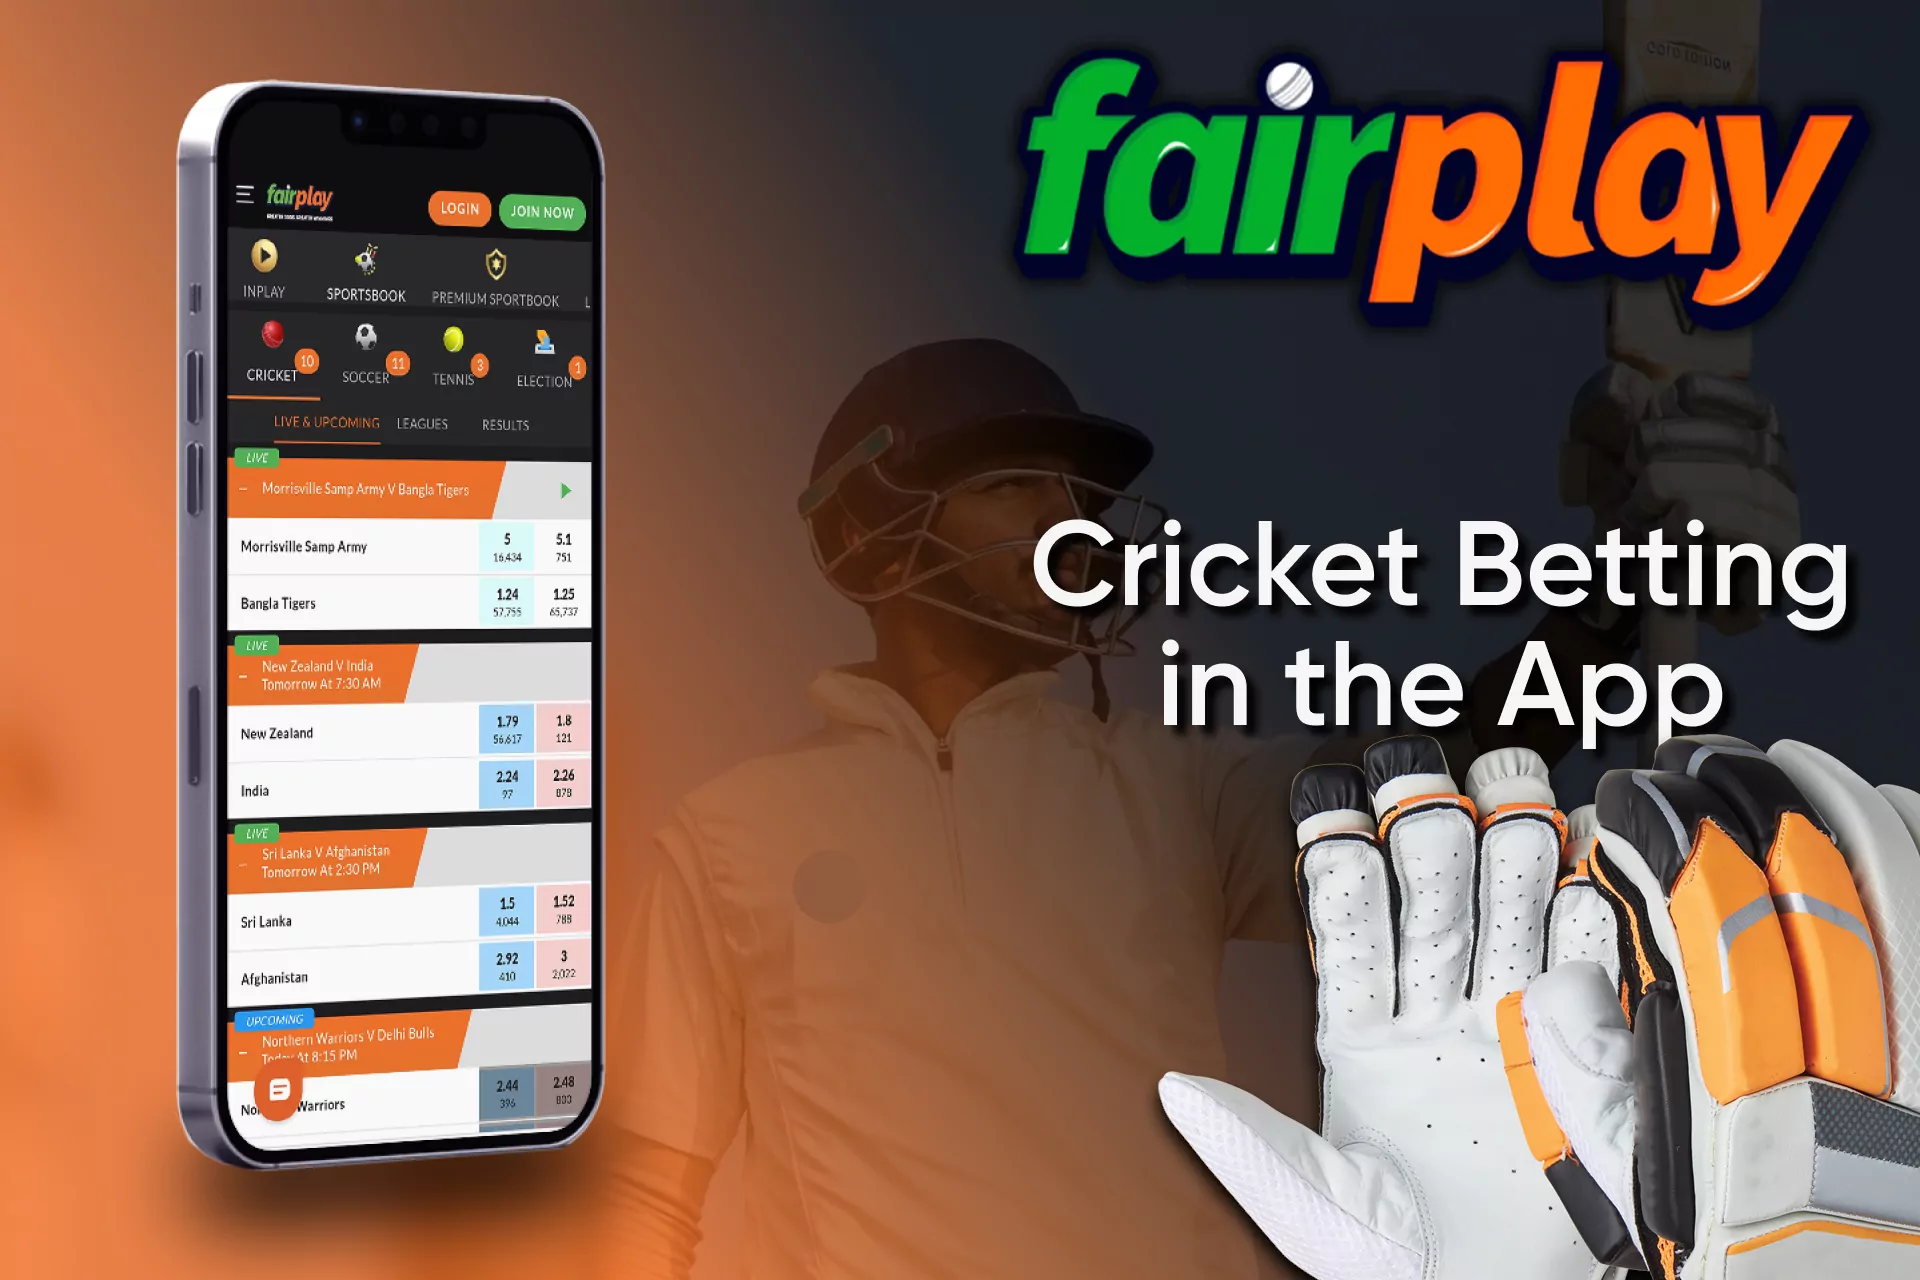 In the Fairplay app, you can bet on cricket matches as well as on the site.